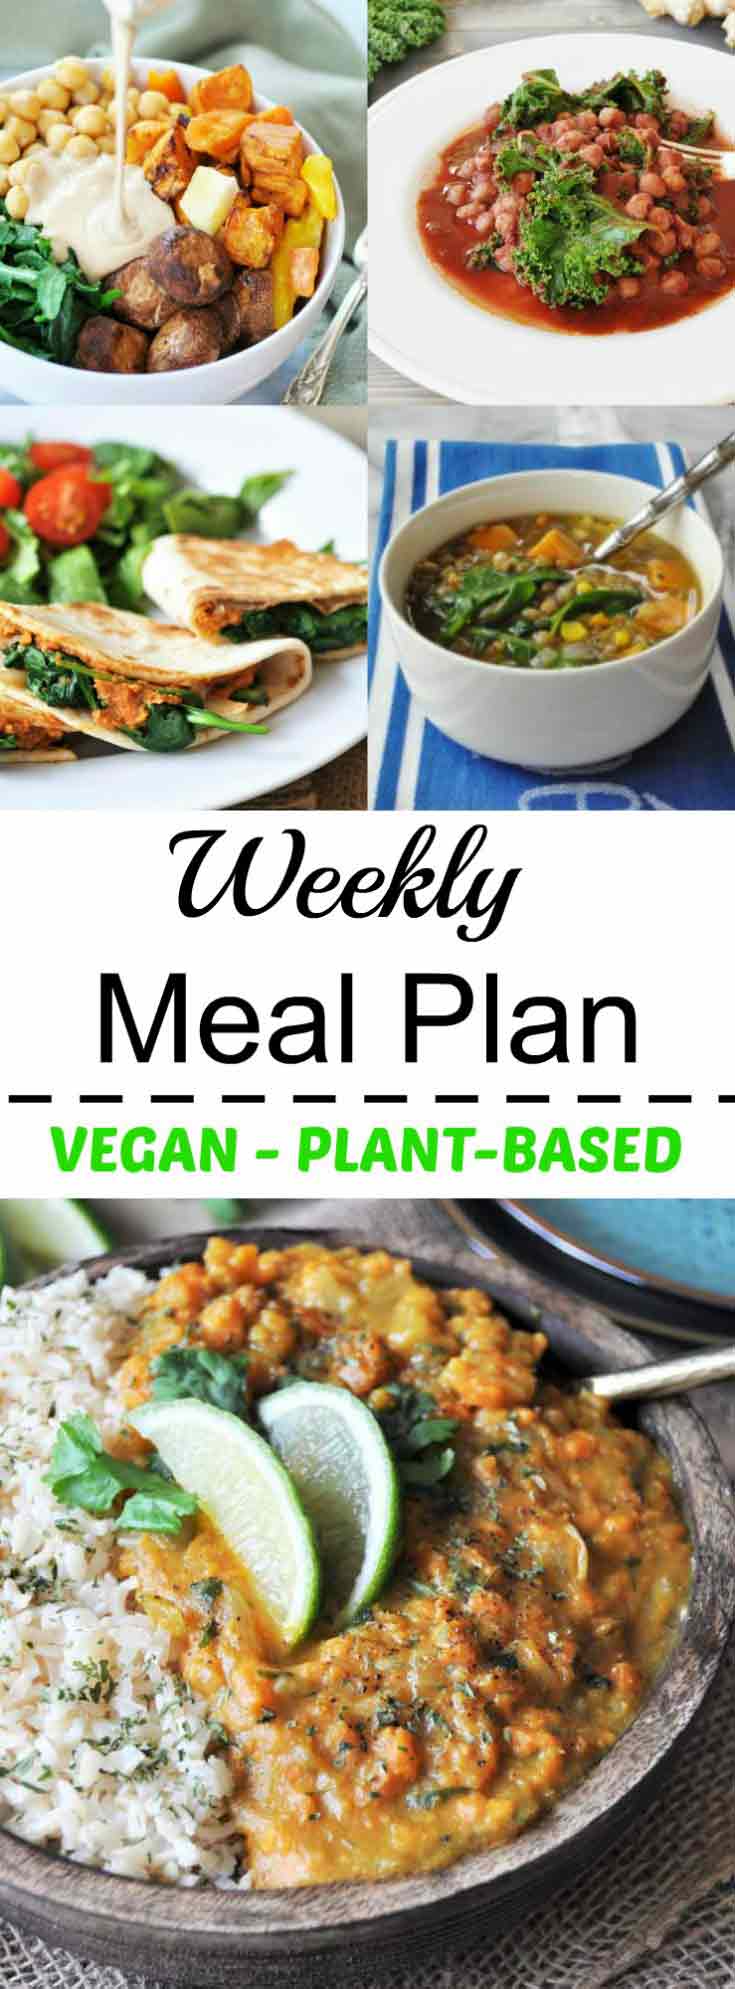 Vegan weekly meal plan. Healthy, fast, and easy plant-based dinners for weeknight dinners